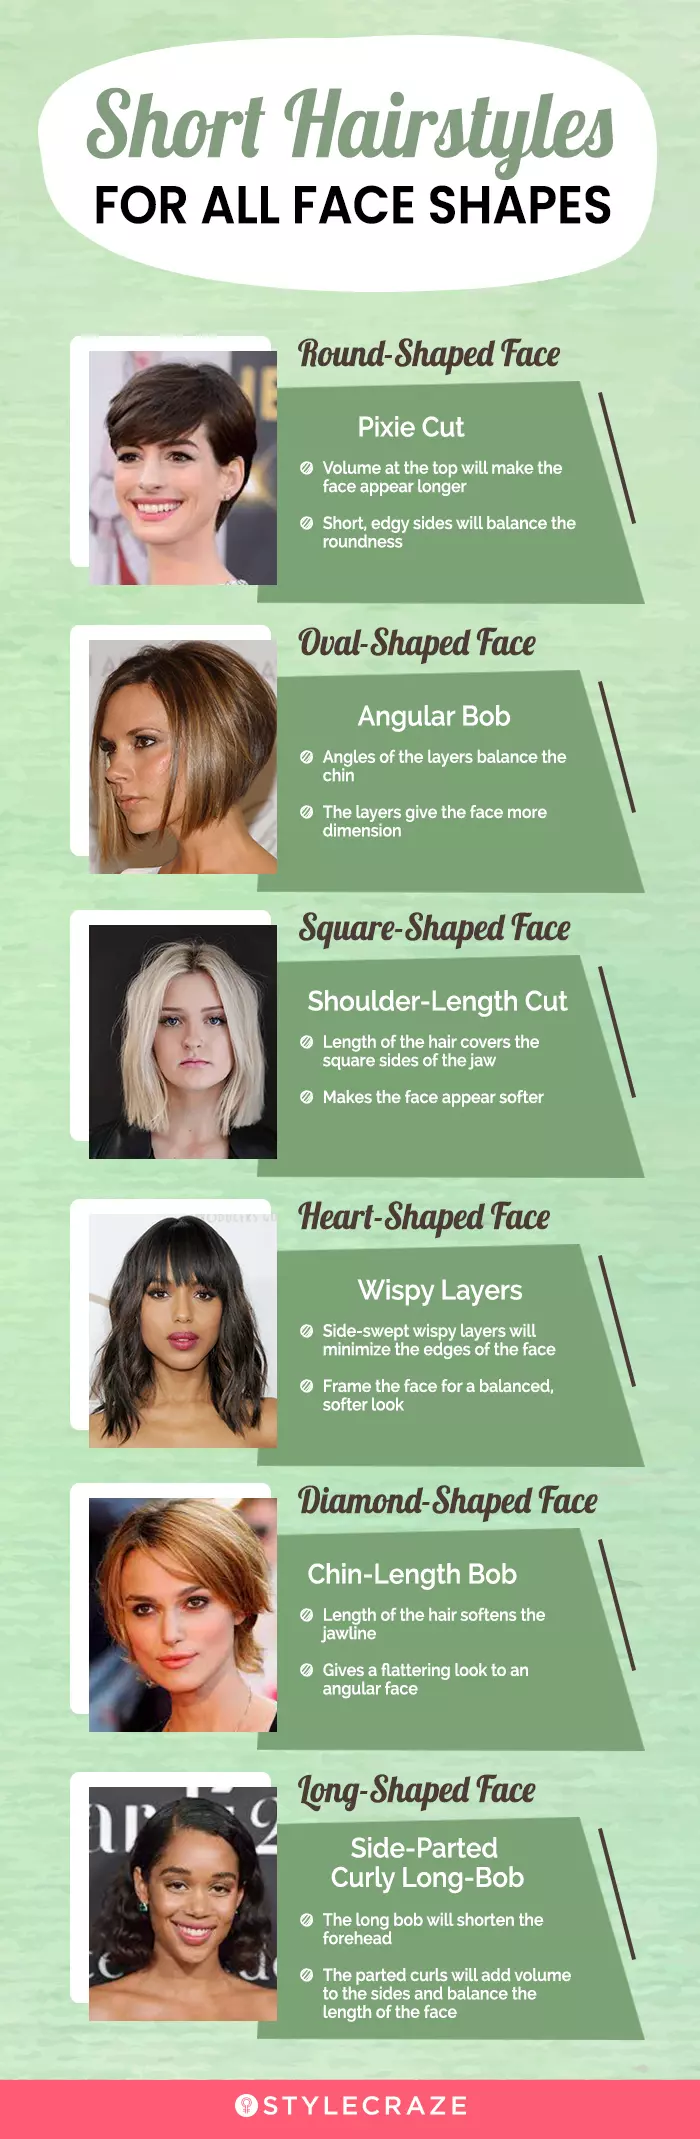 short hairstyles for all face shapes (infographic) 